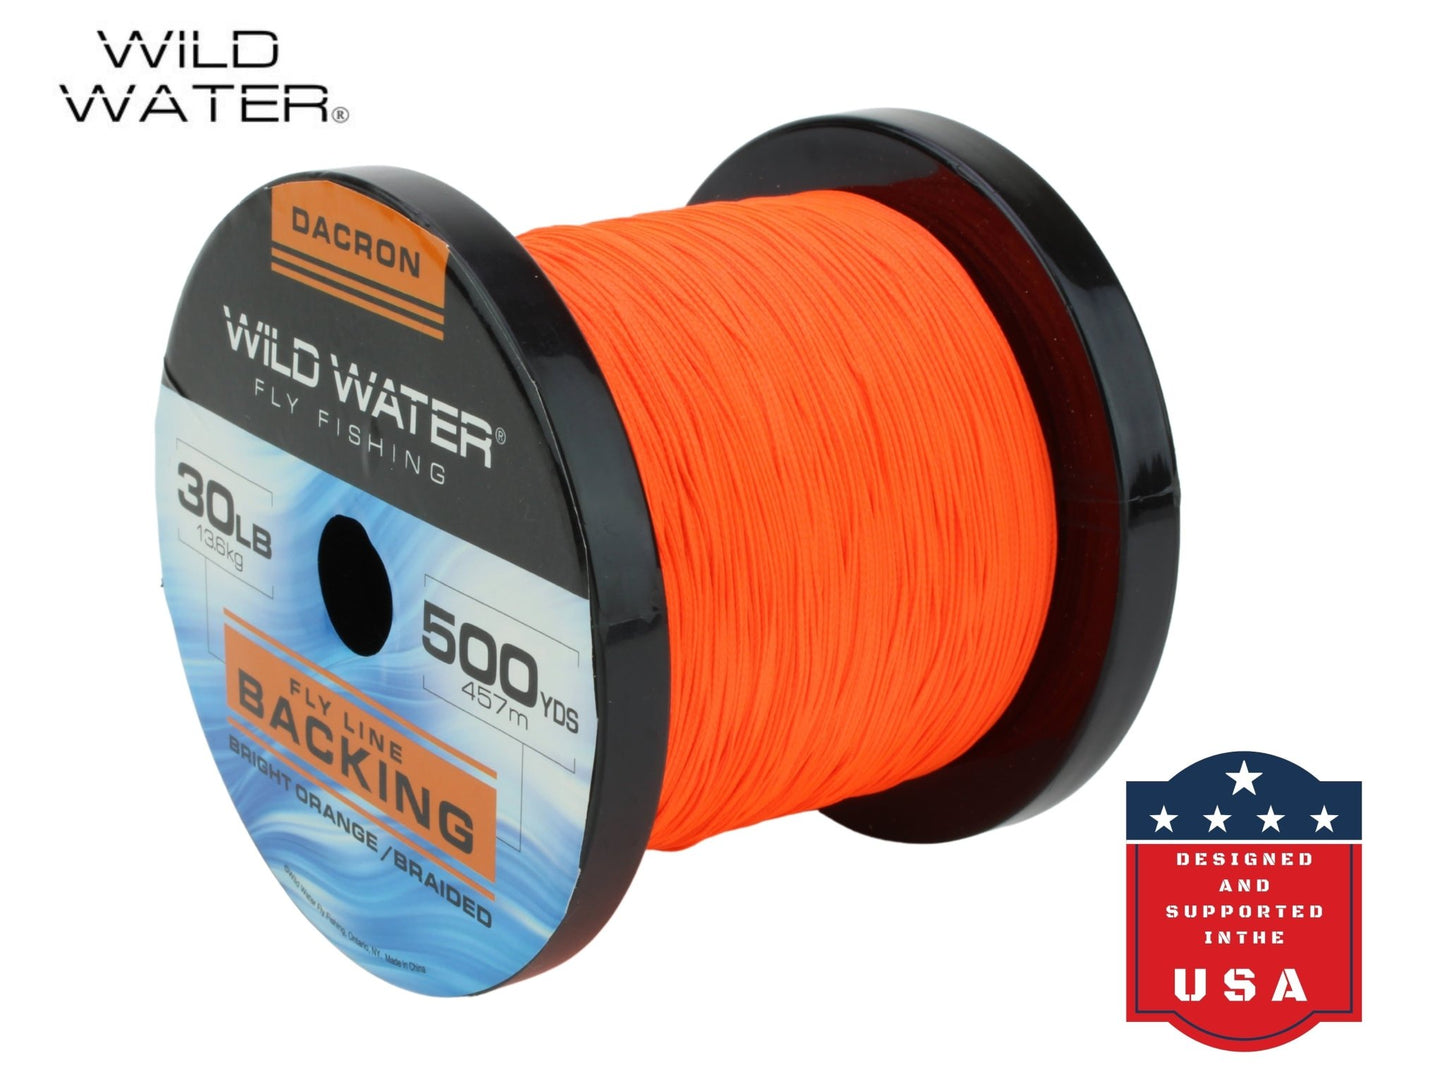 Wild Water Fly Fishing Braided Dacron Backing Spool, 30# 500 yards, Bright Orange - Angler's Pro Tackle & Outdoors